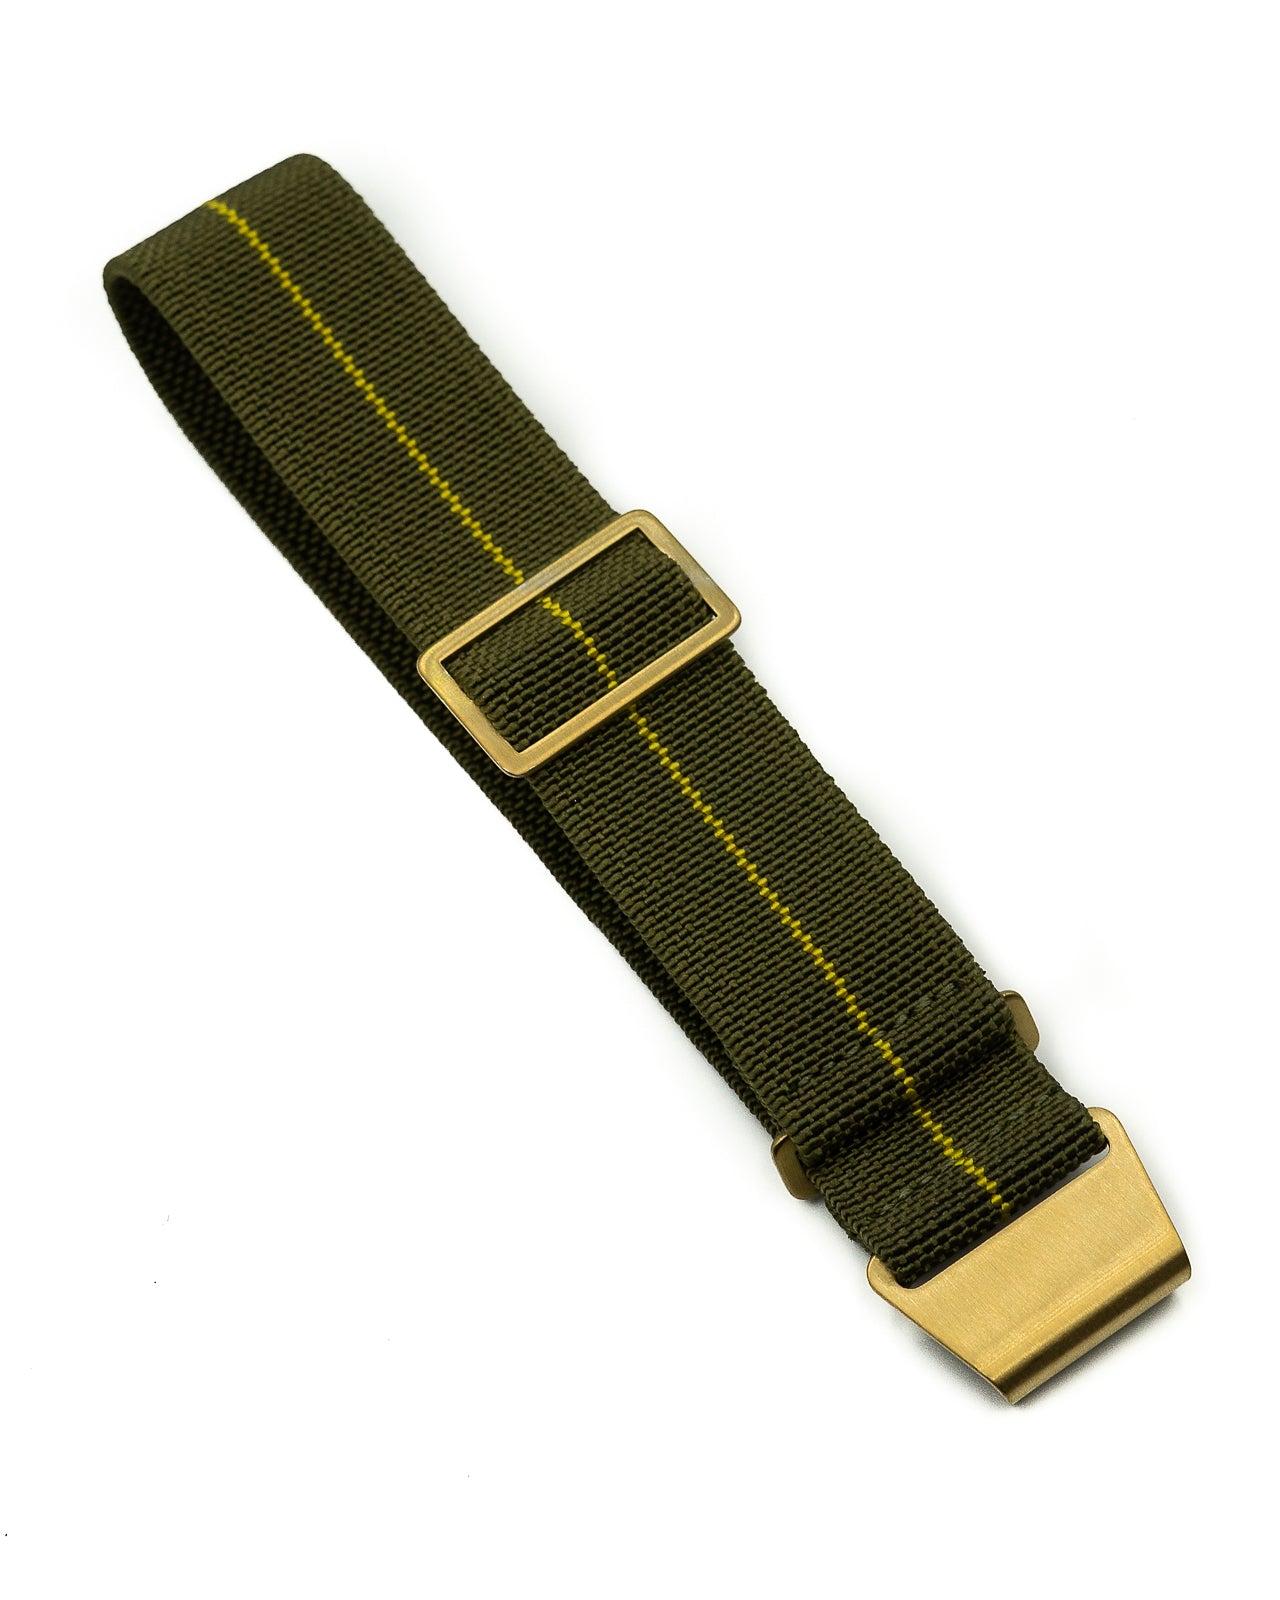 PARA Elastic (Bronze) - Olive Green with Yellow Centerline